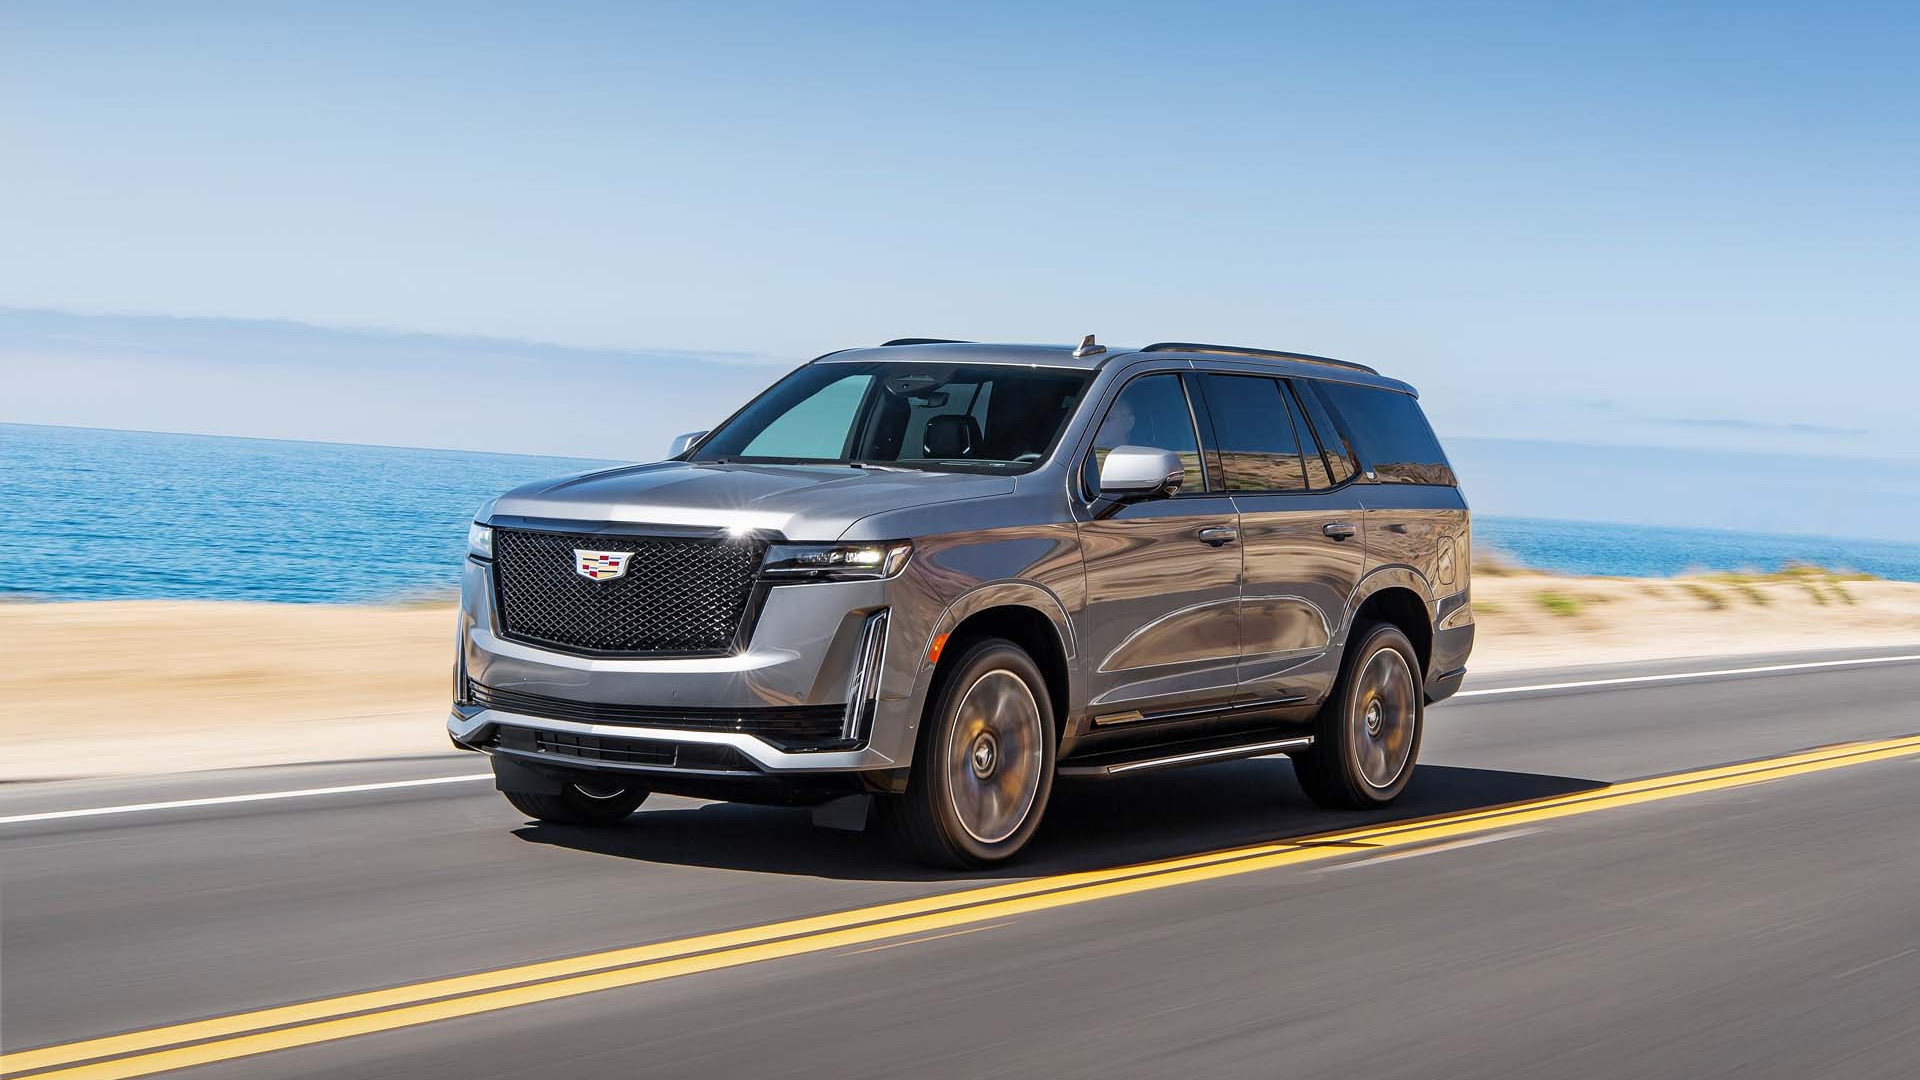 First drive review: 2021 Cadillac Escalade intimidates with size